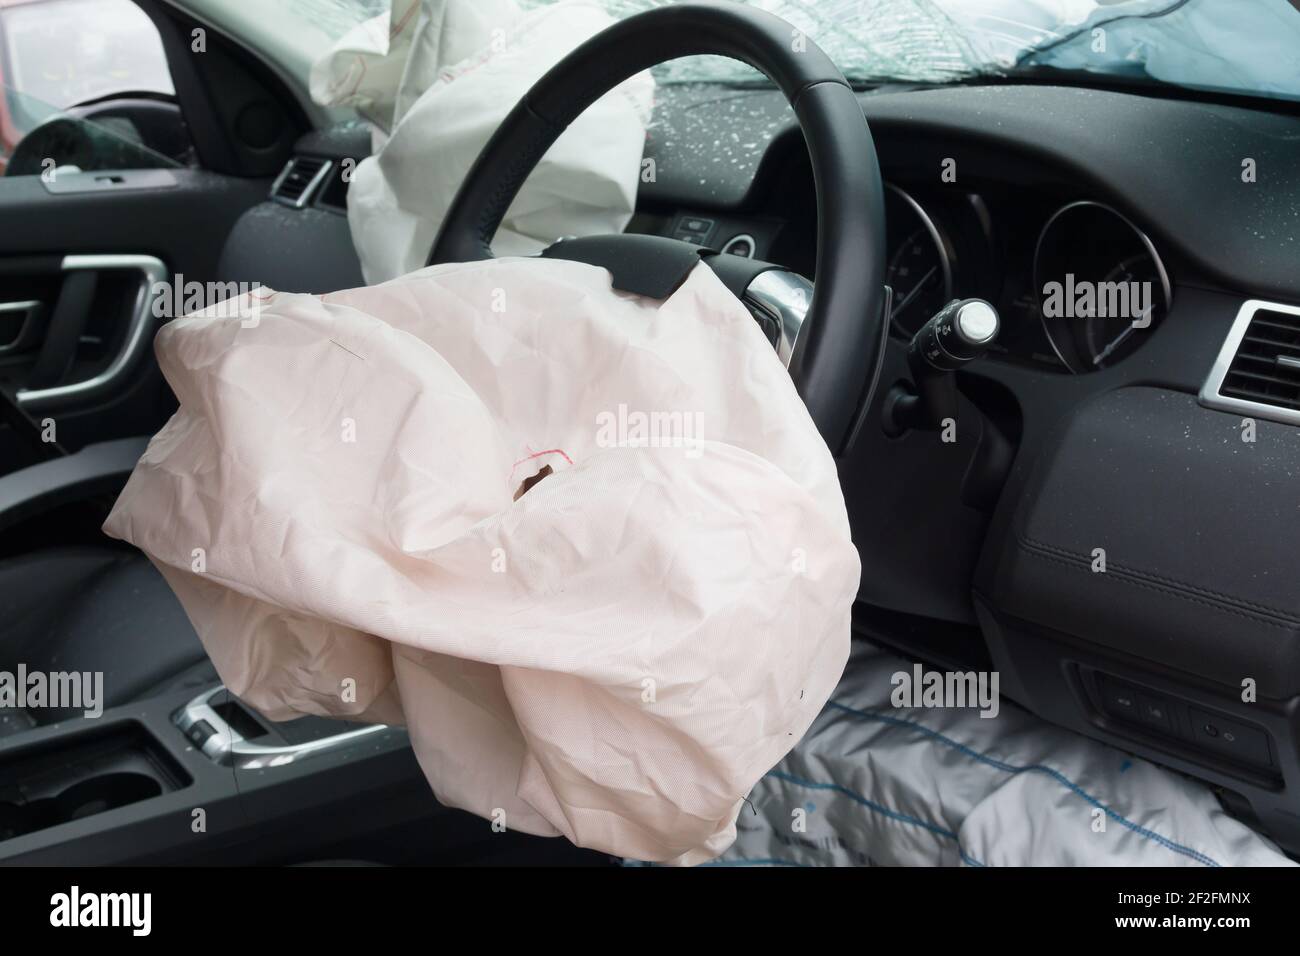 Interior of a automobile or car involved in a vehicle crash with a deployed steering column airbag Stock Photo